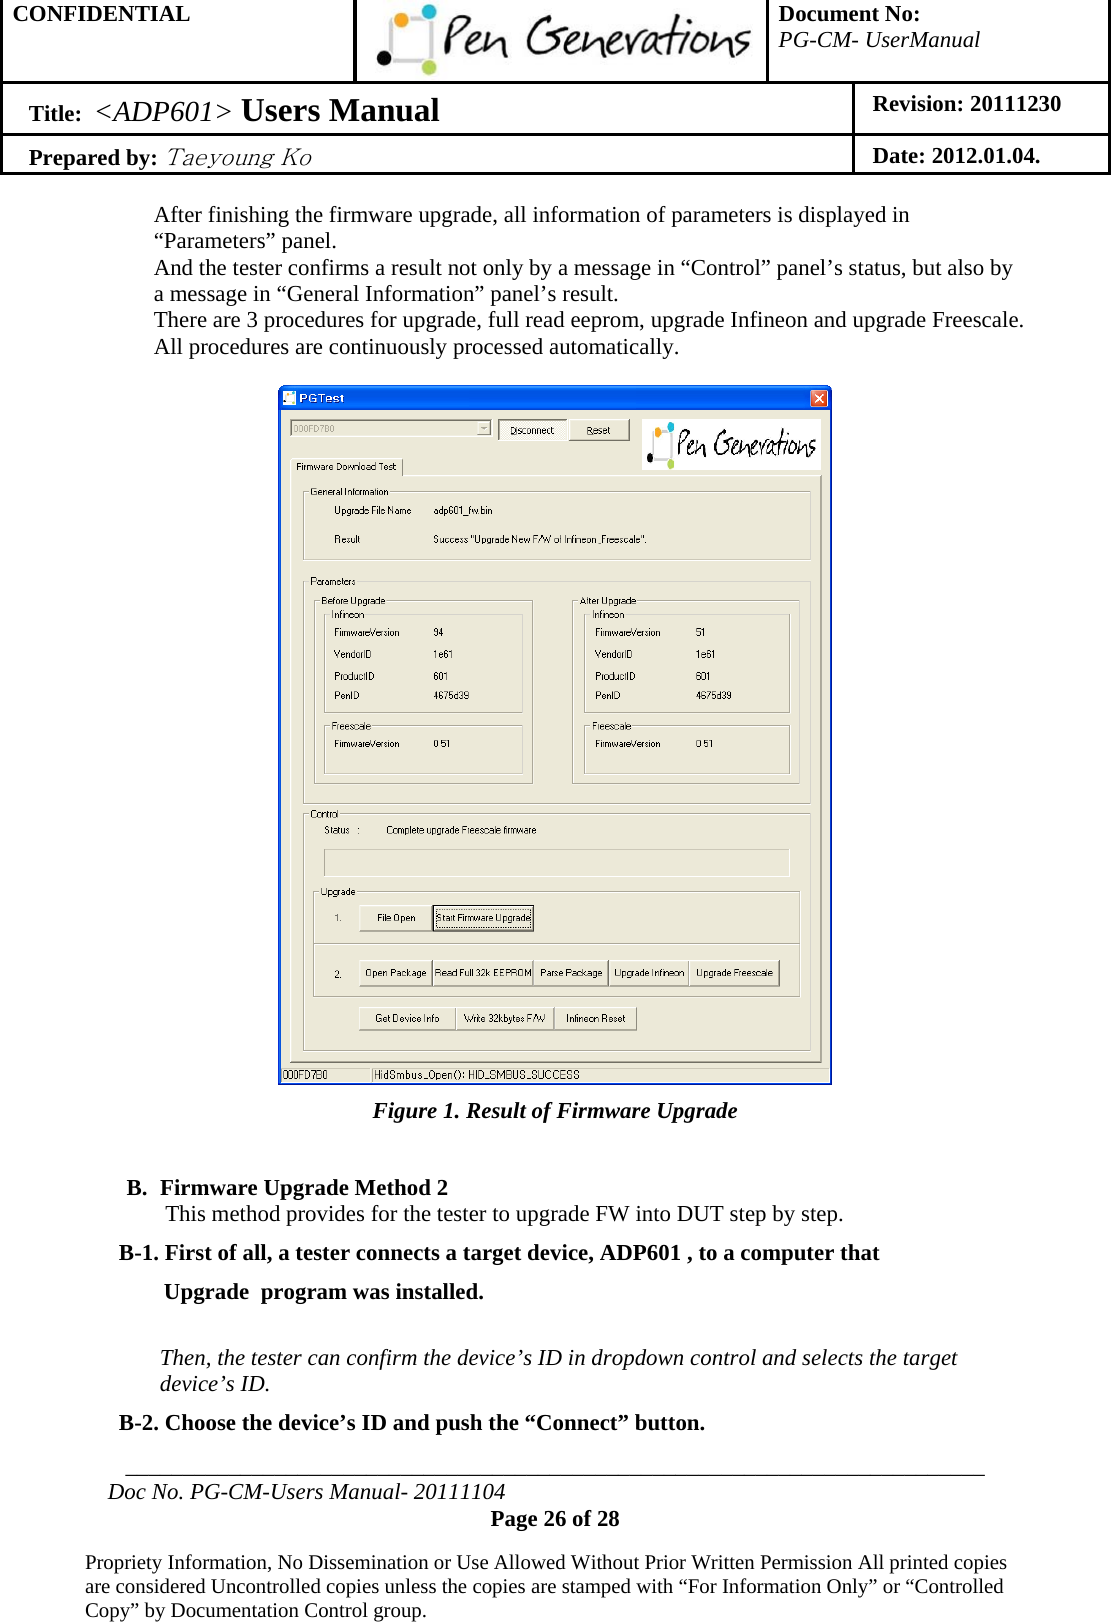 CONFIDENTIAL  Document No: PG-CM- UserManual Title:  &lt;ADP601&gt; Users Manual   Revision: 20111230 Prepared by: Taeyoung Ko Date: 2012.01.04.  ___________________________________________________________________________ Doc No. PG-CM-Users Manual- 20111104 Page 26 of 28  Propriety Information, No Dissemination or Use Allowed Without Prior Written Permission All printed copies are considered Uncontrolled copies unless the copies are stamped with “For Information Only” or “Controlled Copy” by Documentation Control group.  After finishing the firmware upgrade, all information of parameters is displayed in “Parameters” panel. And the tester confirms a result not only by a message in “Control” panel’s status, but also by a message in “General Information” panel’s result. There are 3 procedures for upgrade, full read eeprom, upgrade Infineon and upgrade Freescale. All procedures are continuously processed automatically.   Figure 1. Result of Firmware Upgrade  B. Firmware Upgrade Method 2 This method provides for the tester to upgrade FW into DUT step by step. B-1. First of all, a tester connects a target device, ADP601 , to a computer that  Upgrade  program was installed.  Then, the tester can confirm the device’s ID in dropdown control and selects the target device’s ID. B-2. Choose the device’s ID and push the “Connect” button. 